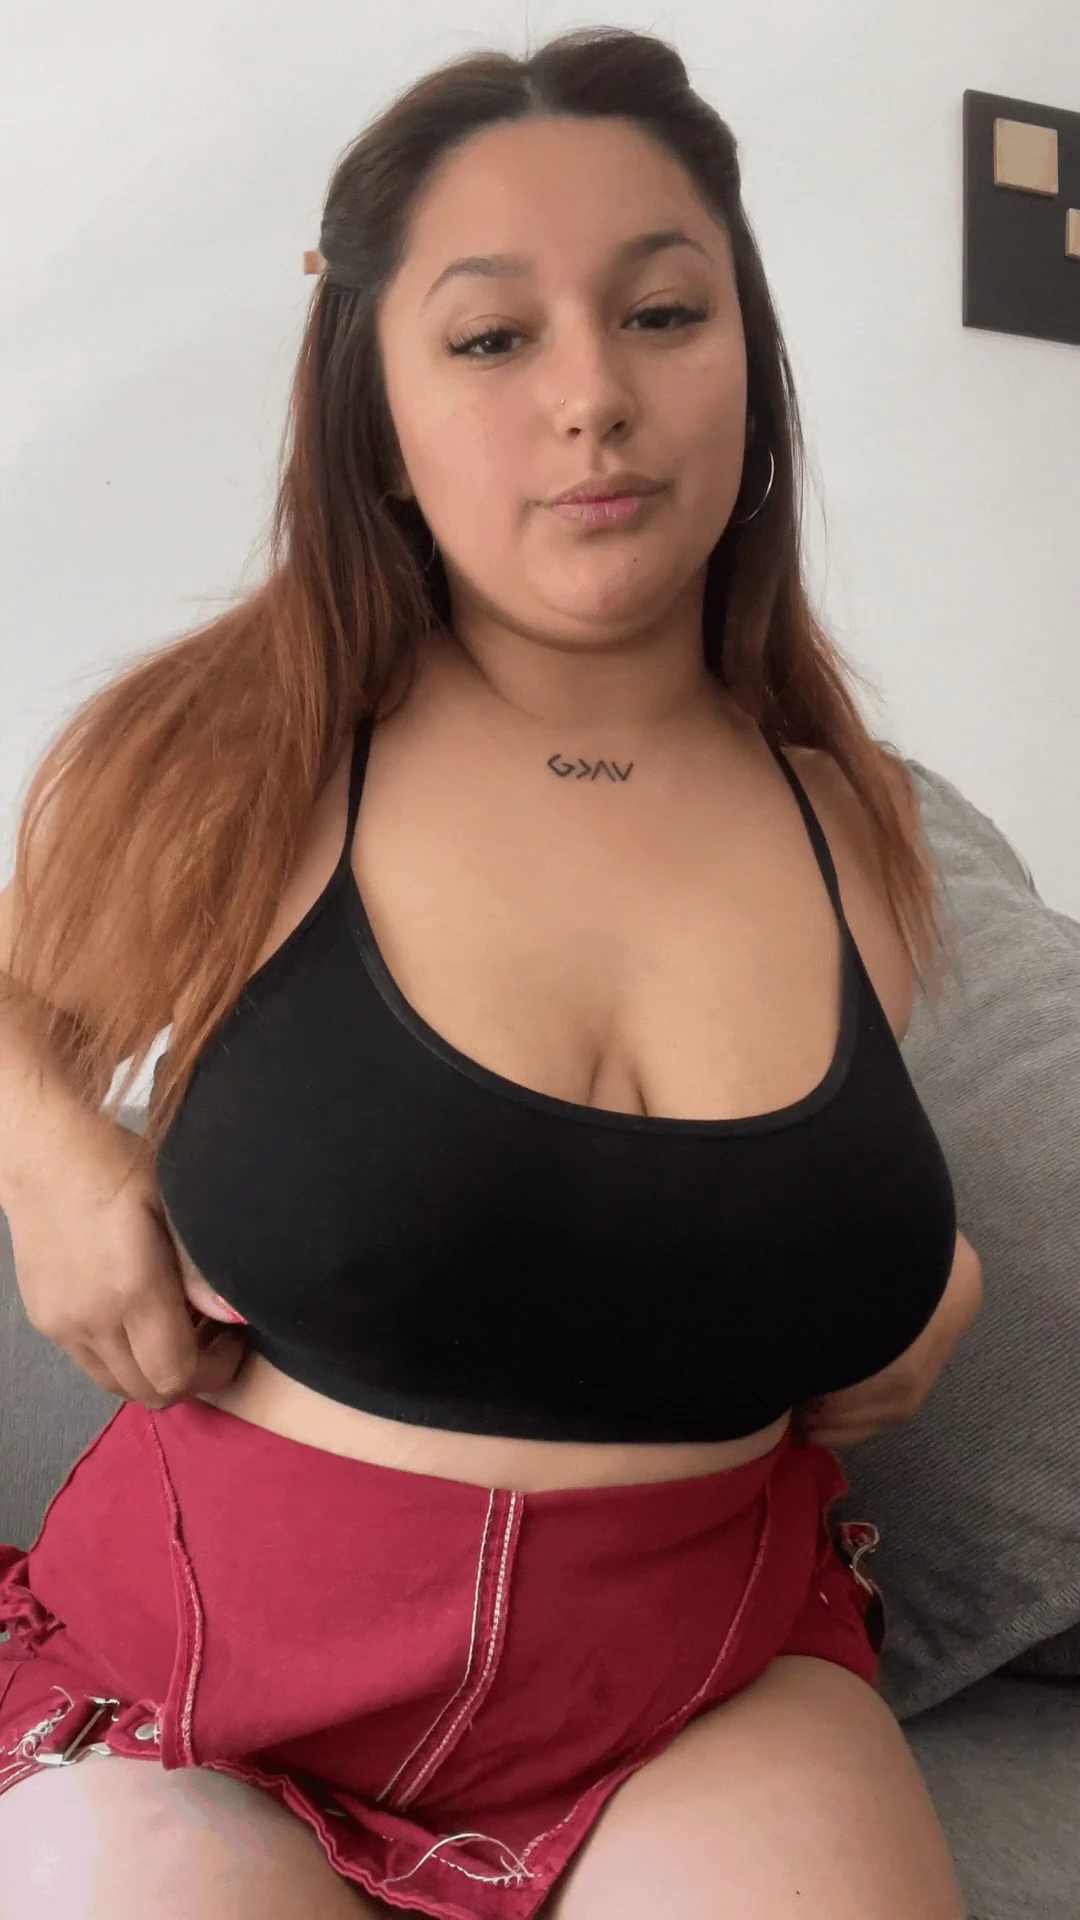 that fall proves that saggy tits are real